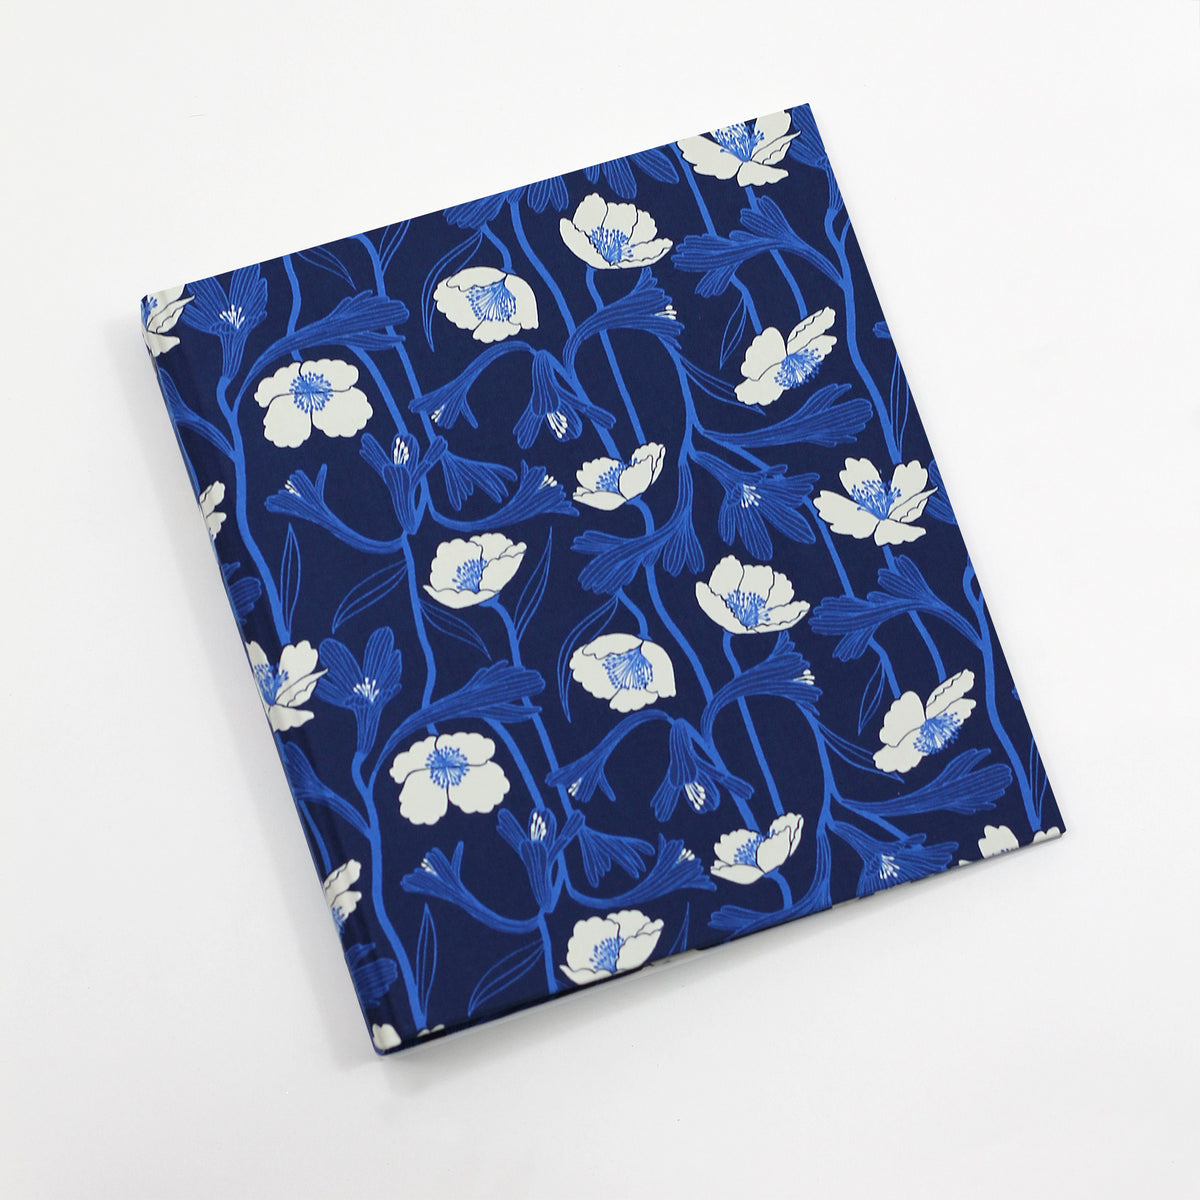 Storage Binder for Photos or Documents | Limited Edition Cover: Water Flowers Navy